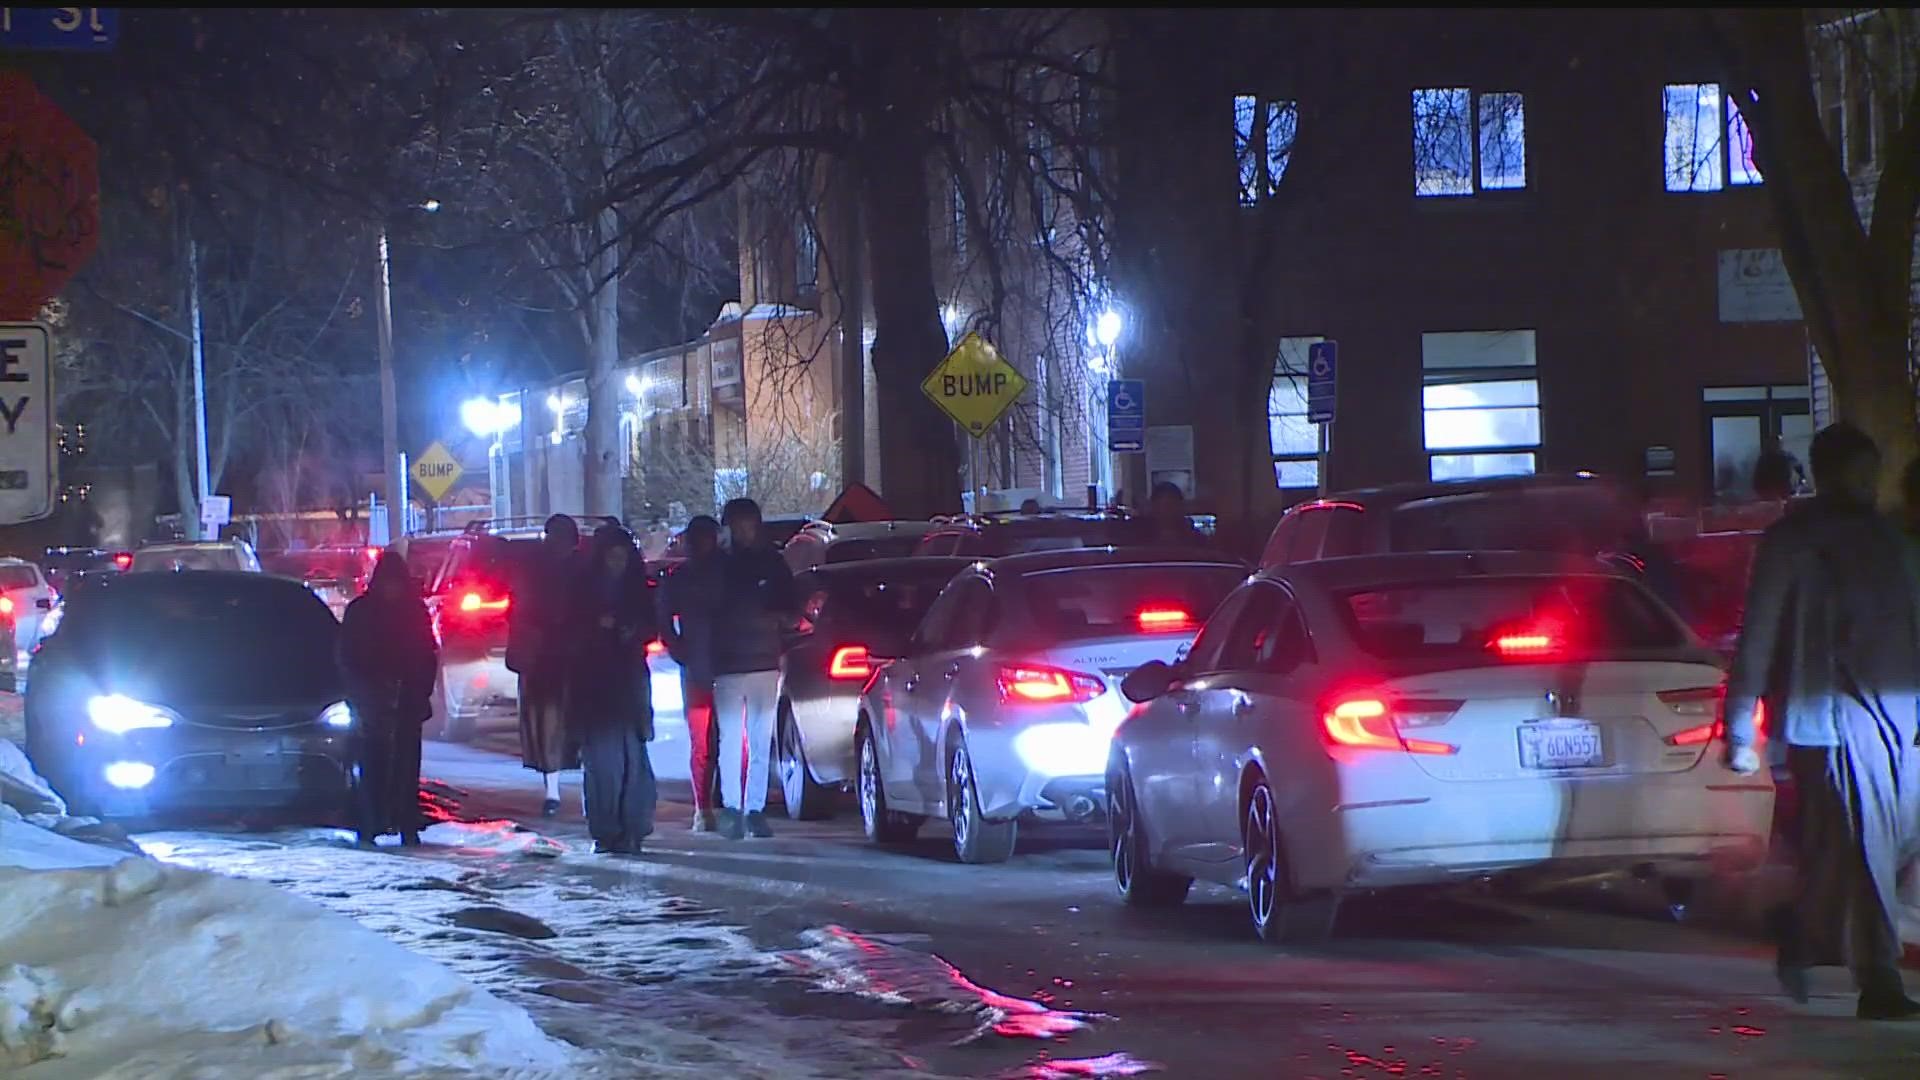 Minneapolis police said crews struggled to get to patients through heavy traffic.